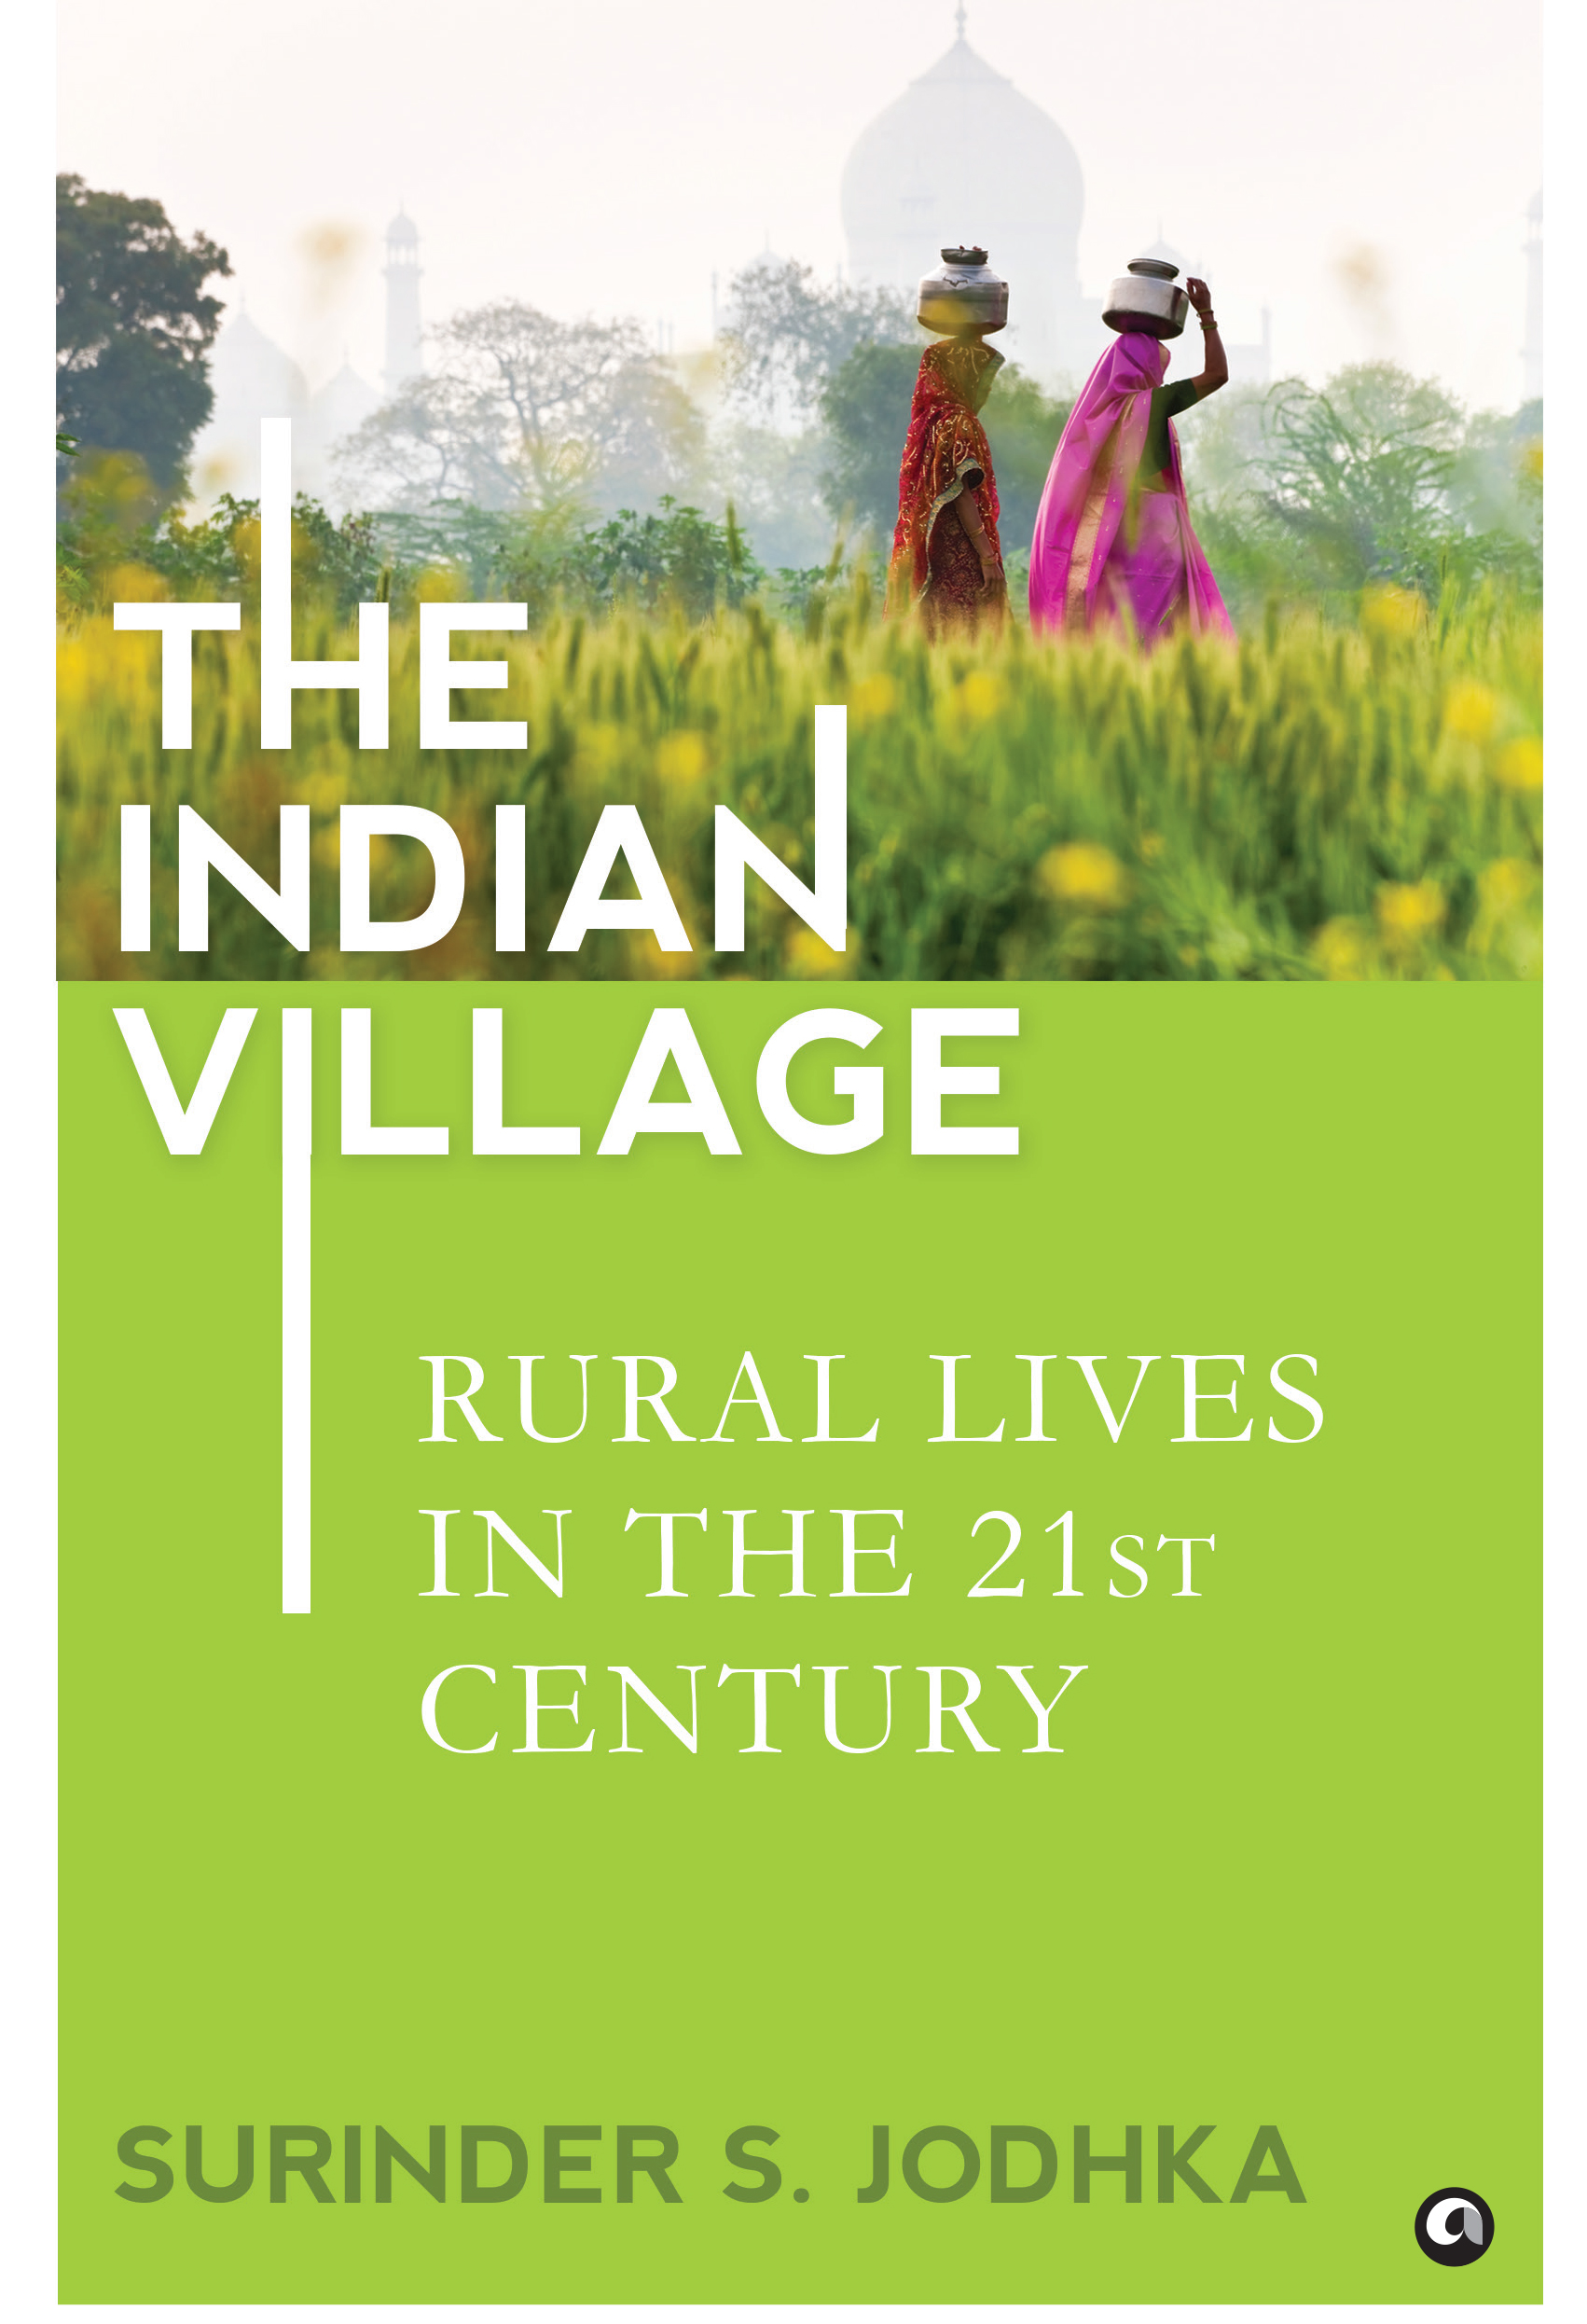 The Indian Village: Rural Lives in the 21st Century